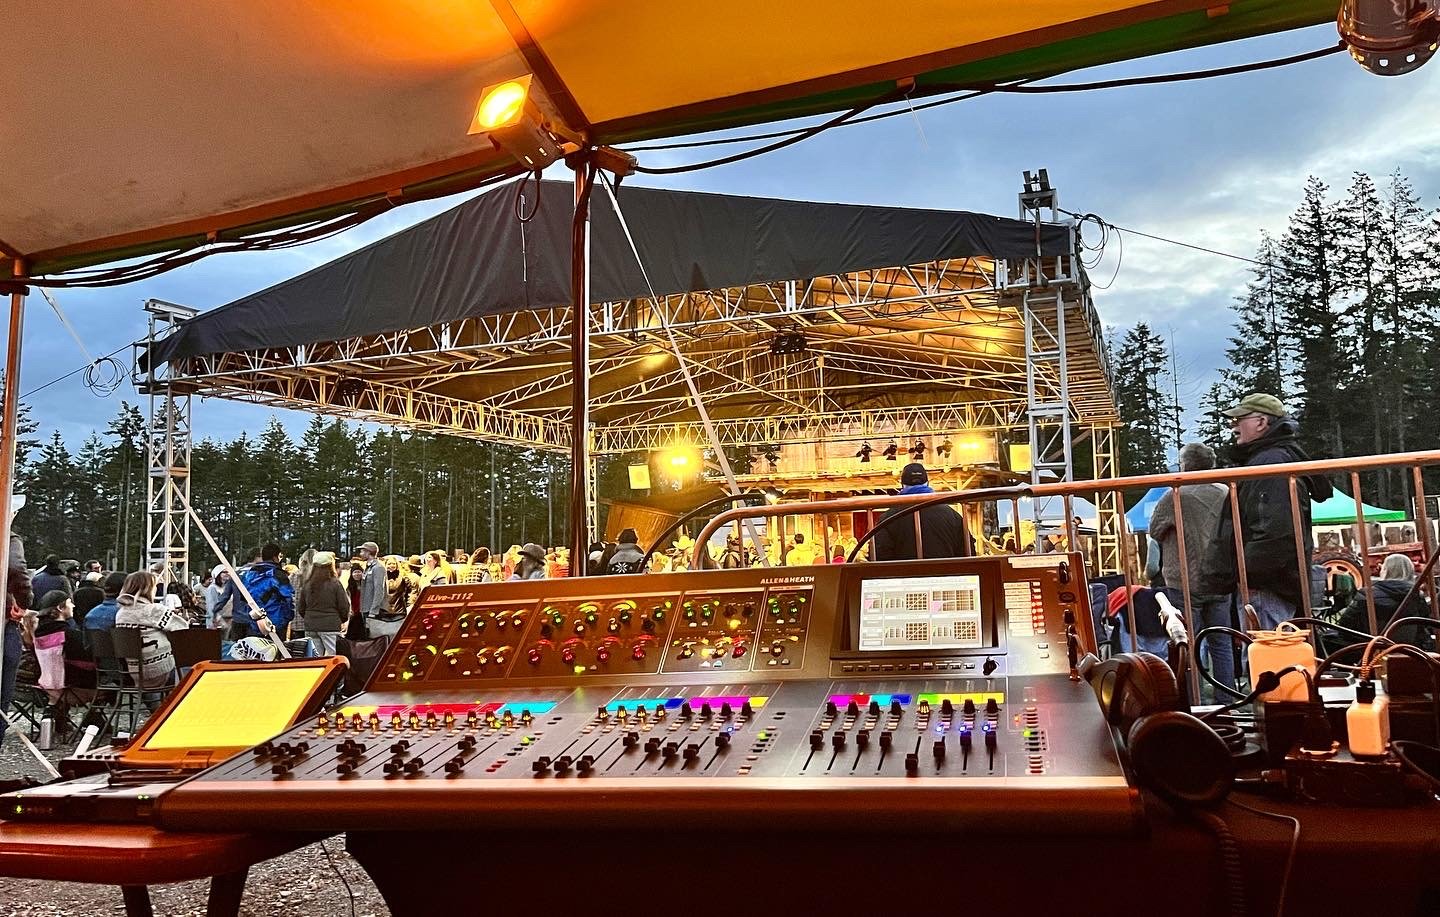 Allen & Heath iLive T112 Digital Mixer at Front-of-House for Cowichan Valley Bluegrass Festival, Laketown Ranch Lake Cowichan 2022